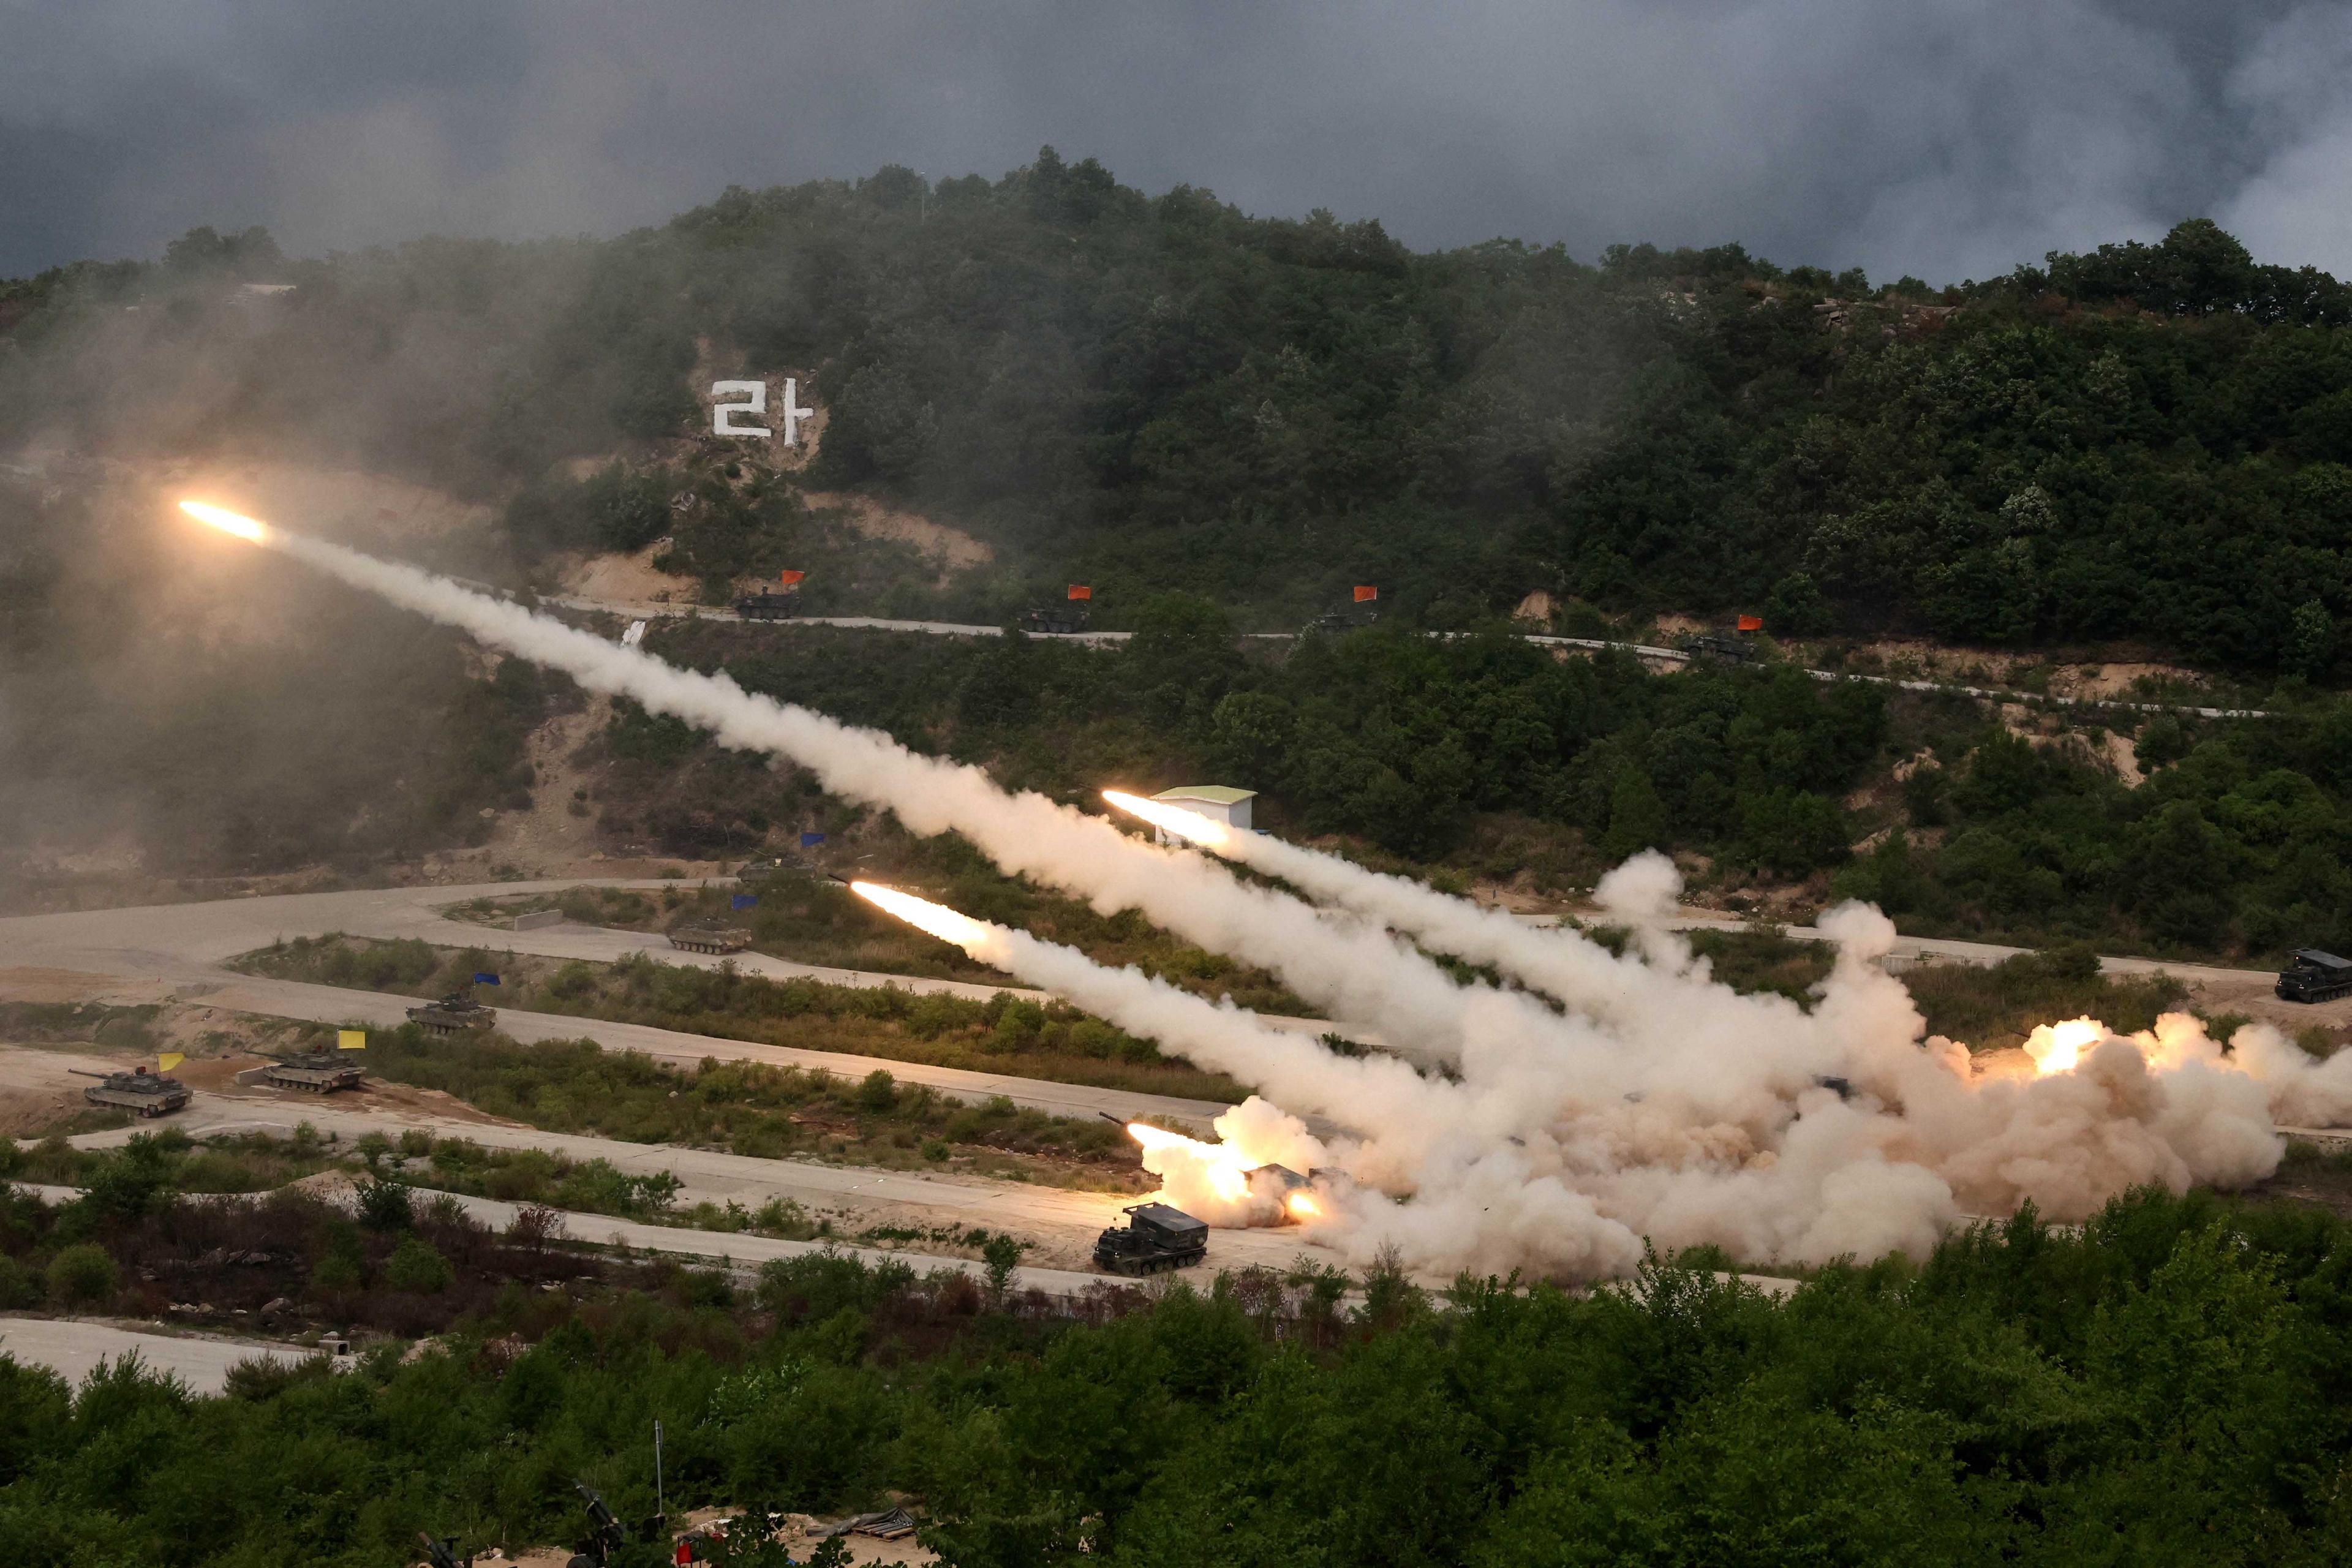 The South Korean army's multiple launch rocket systems fire rockets during South Korea-US joint military drills at Seungjin Fire Training Field in Pocheon, South Korea May 25. Photo: Reuters